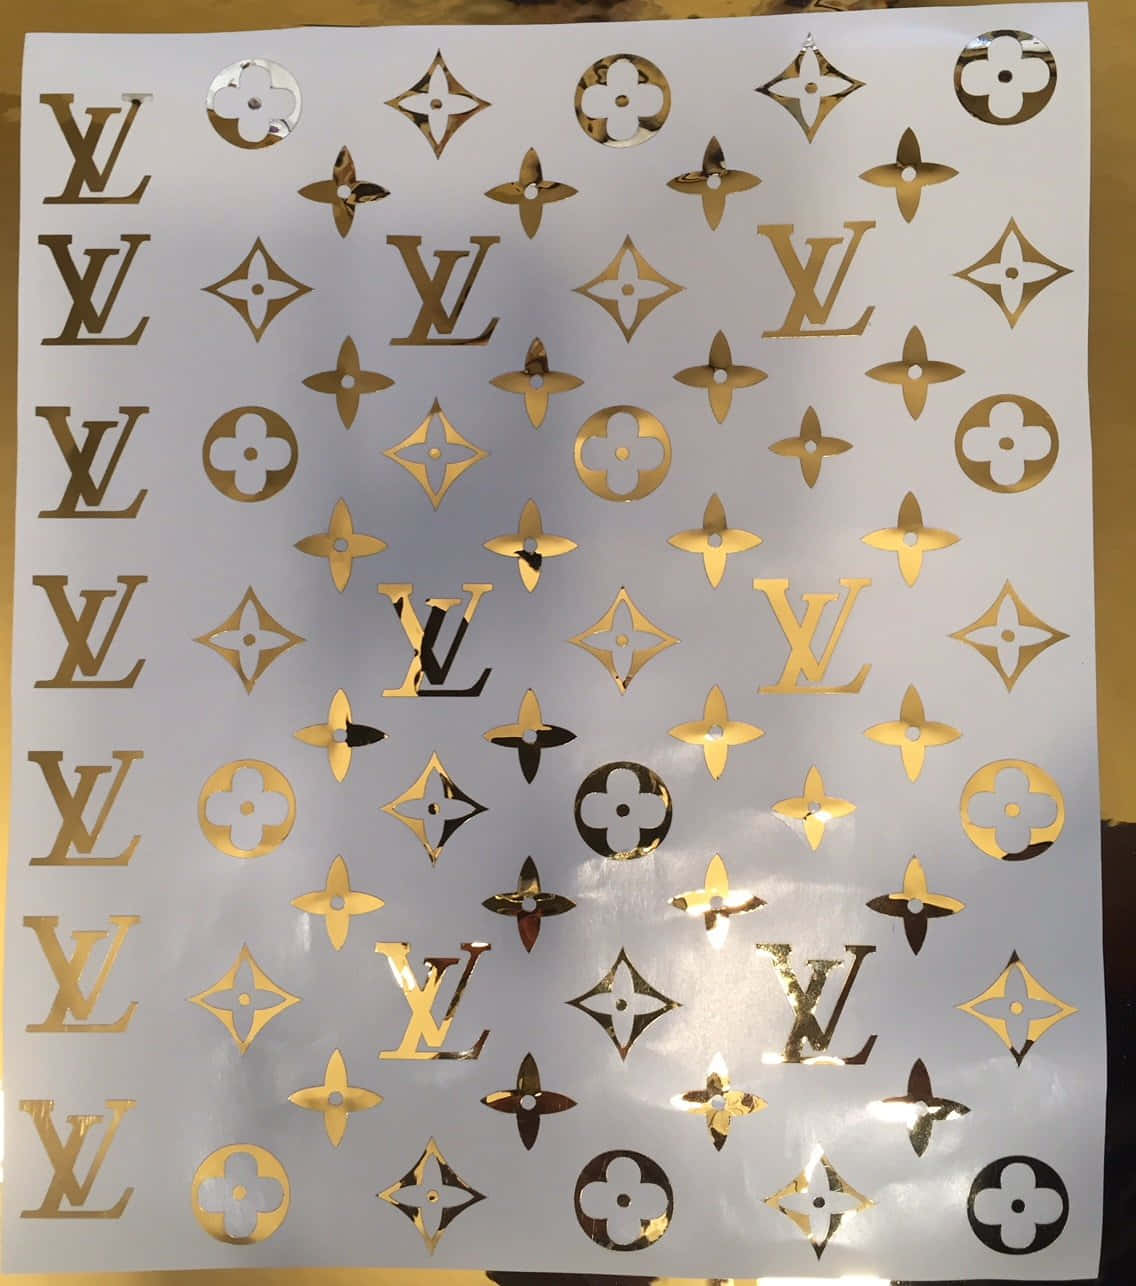 Download The Classic and Timeless Louis Vuitton Pattern